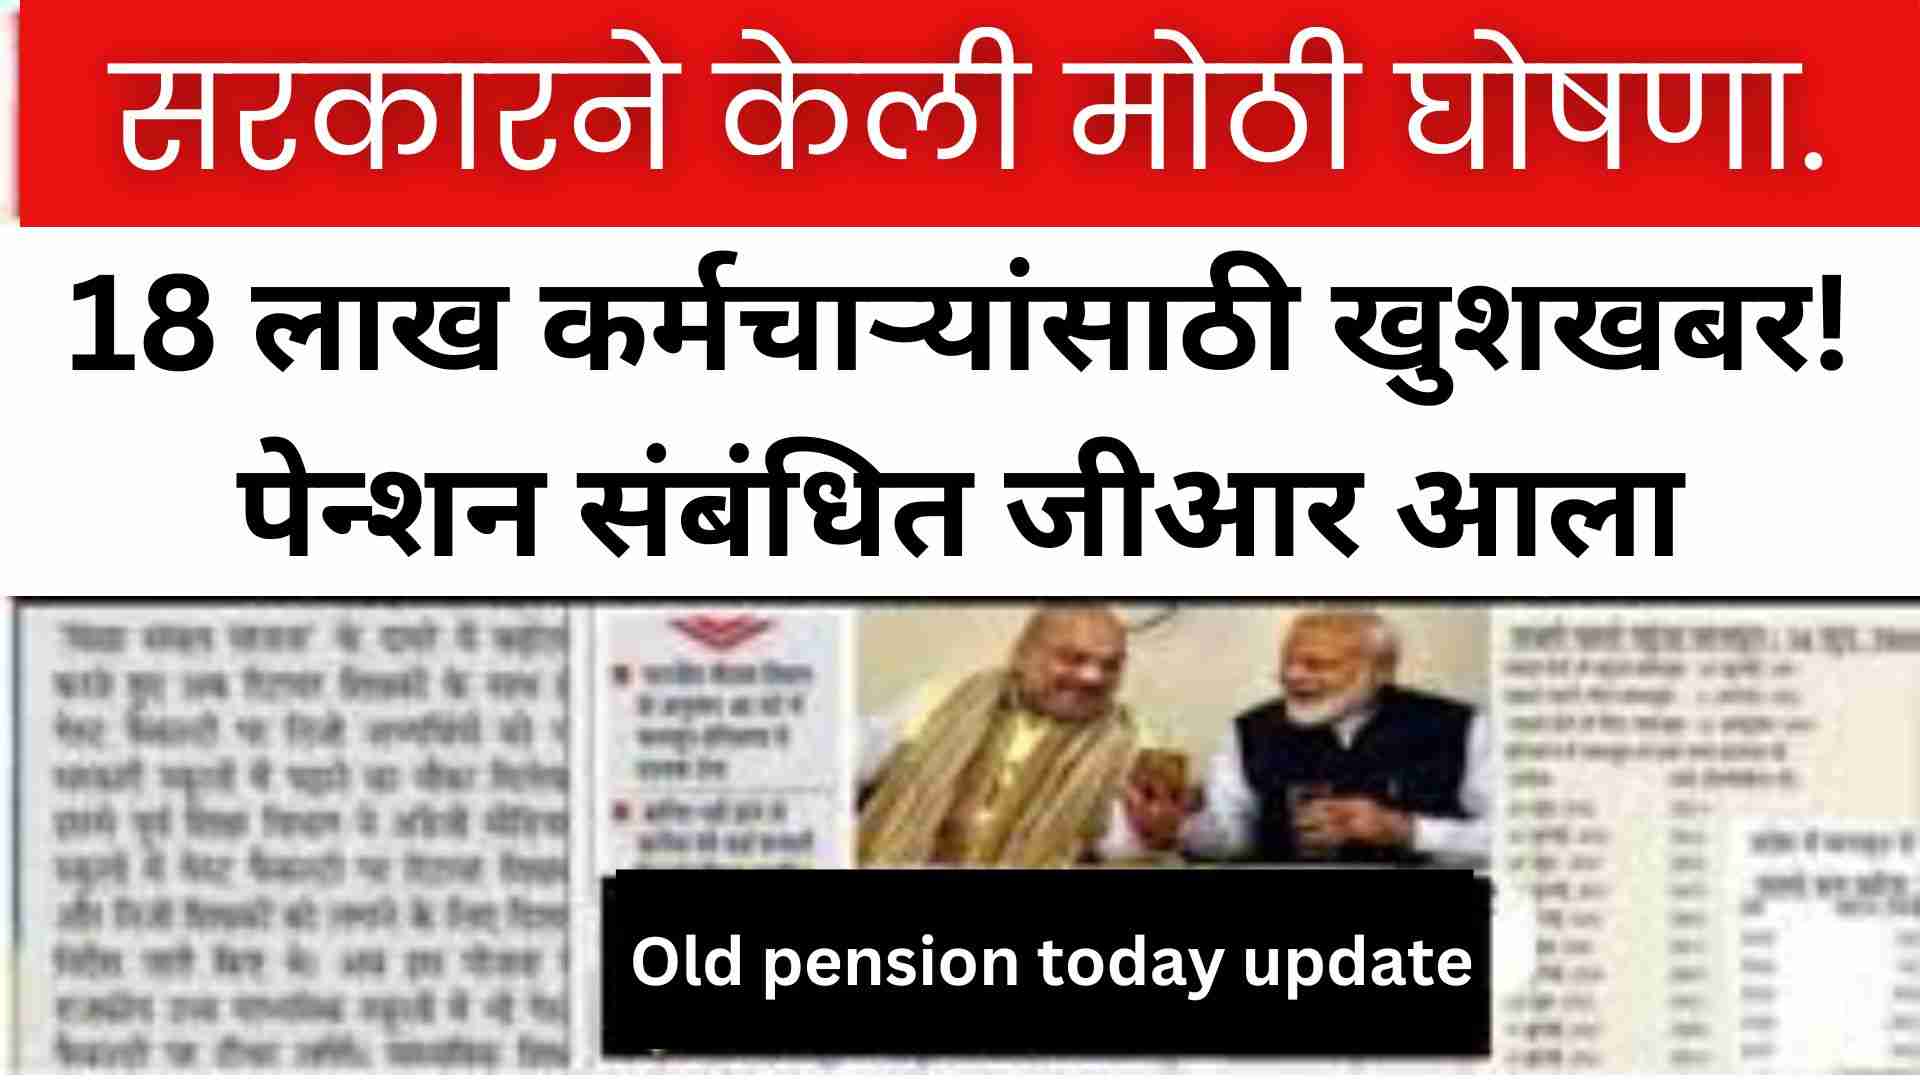 Old pension today update